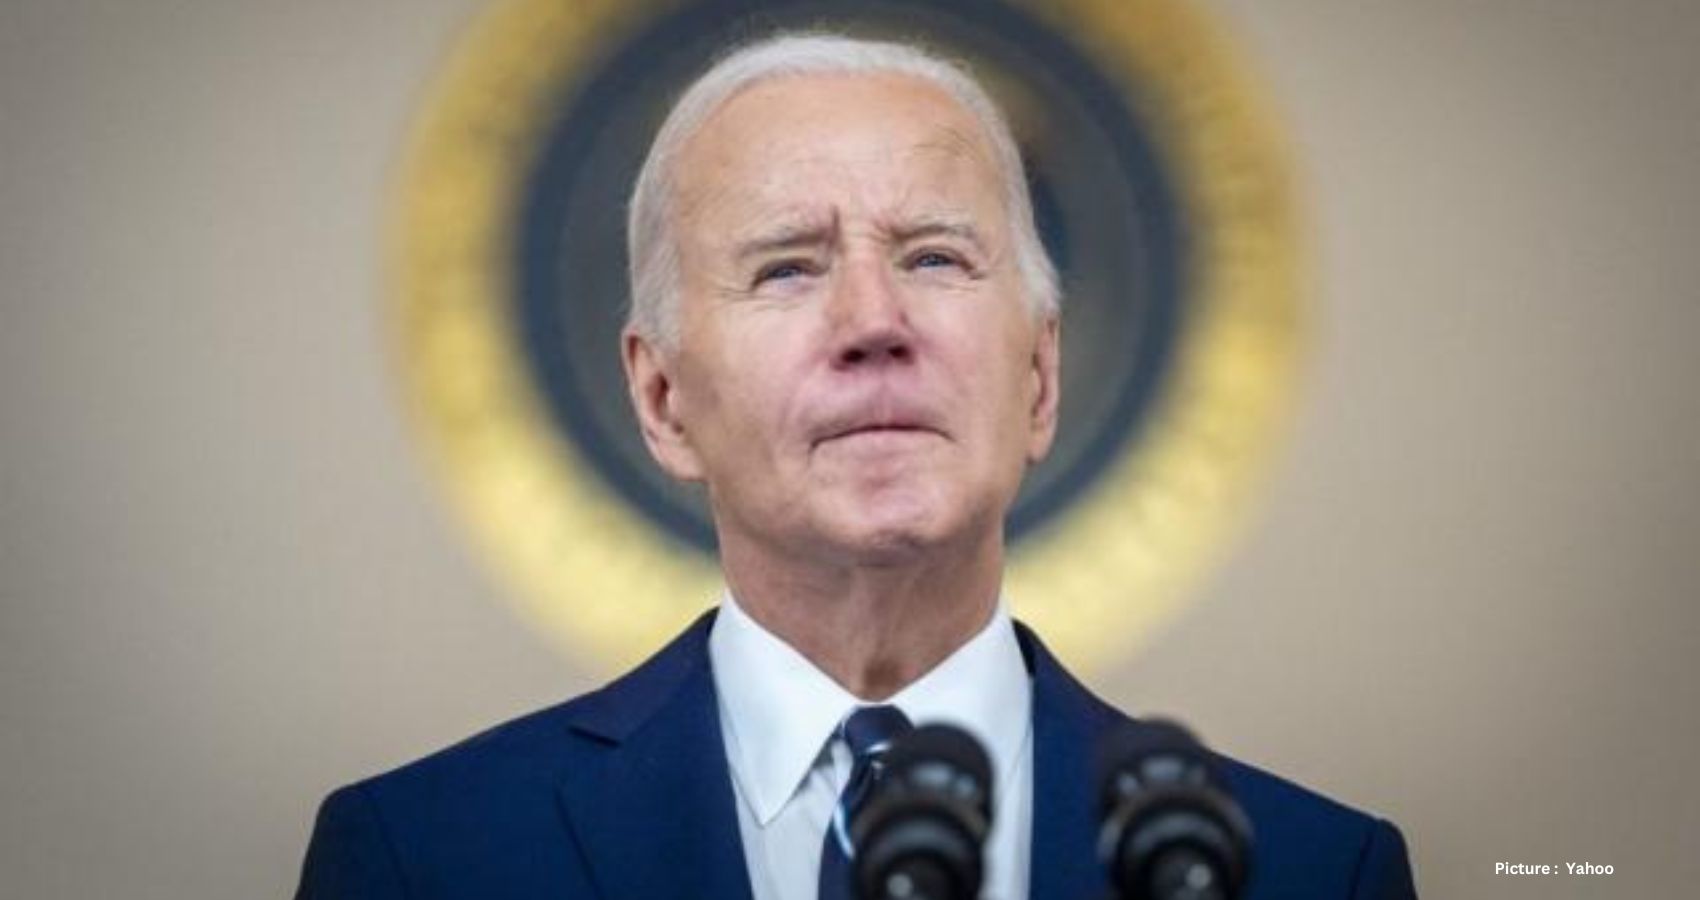 Biden’s Approval Rating Dips to Near All-Time Low of 38%, Gallup Survey Shows